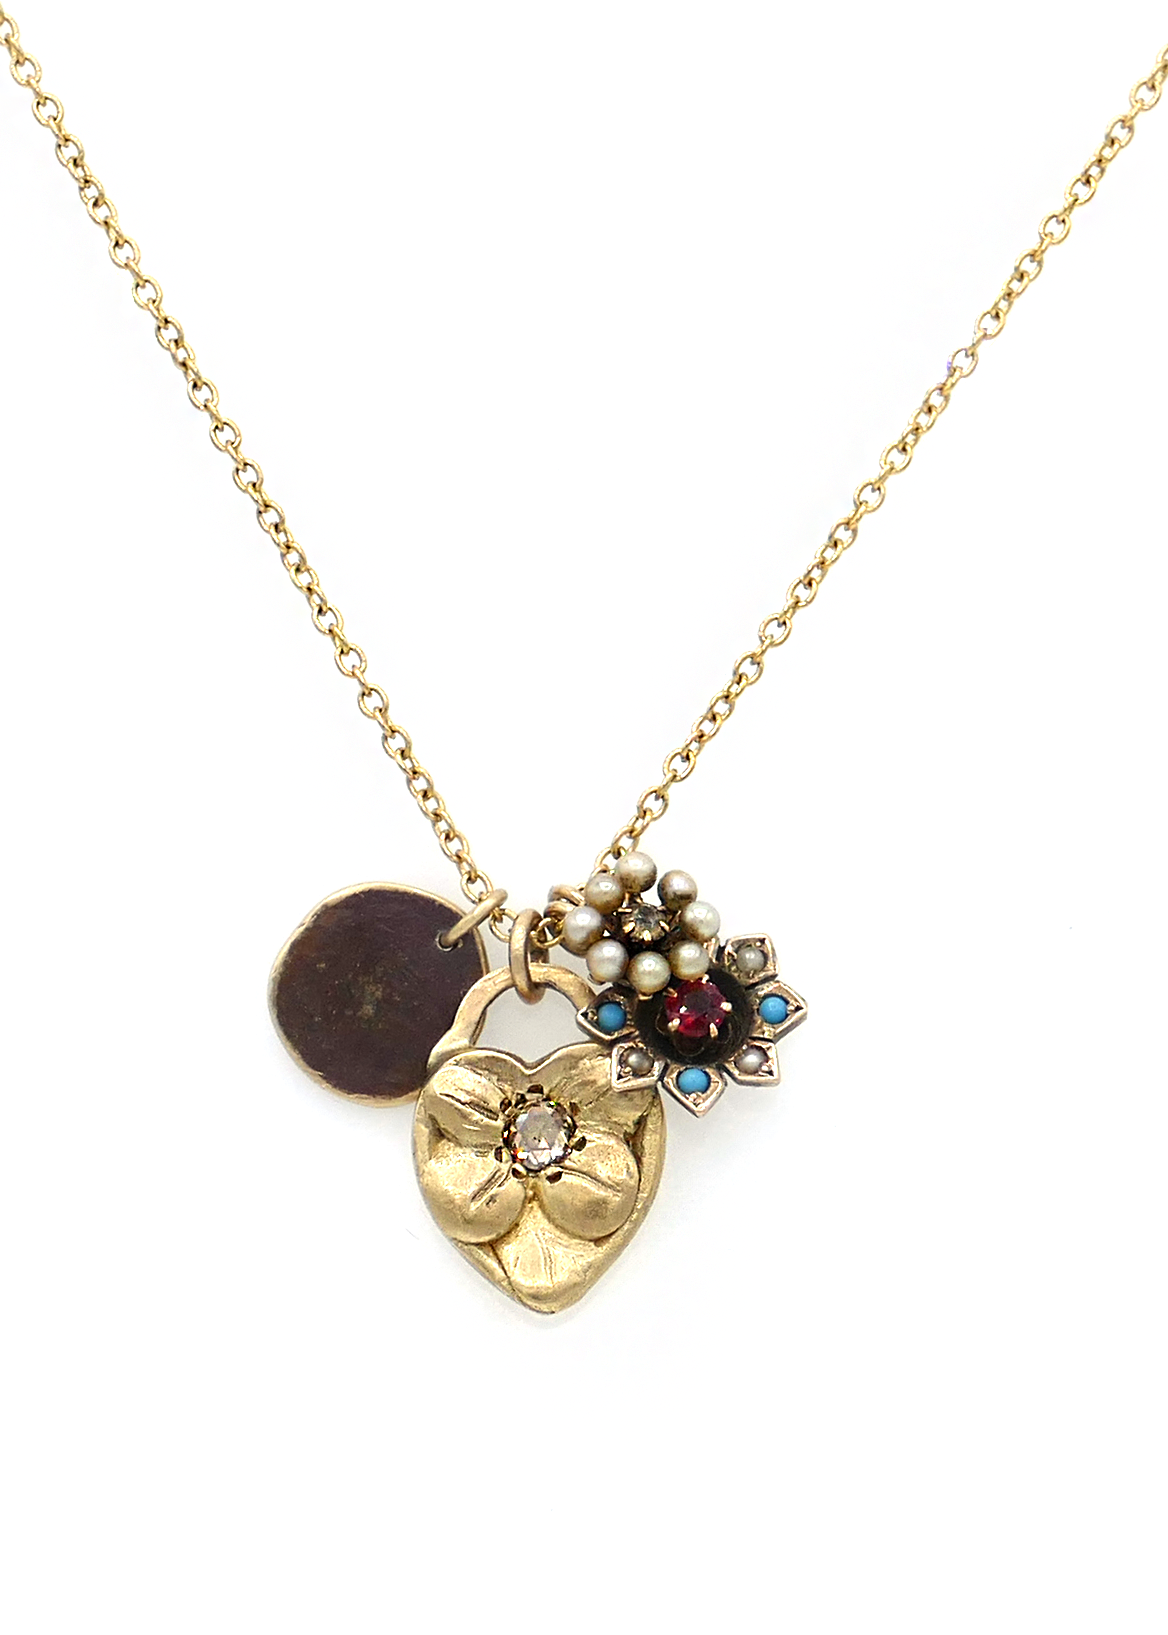 Vintage Charms Necklace in 14K Gold with Heart, Disc & Flower Charms